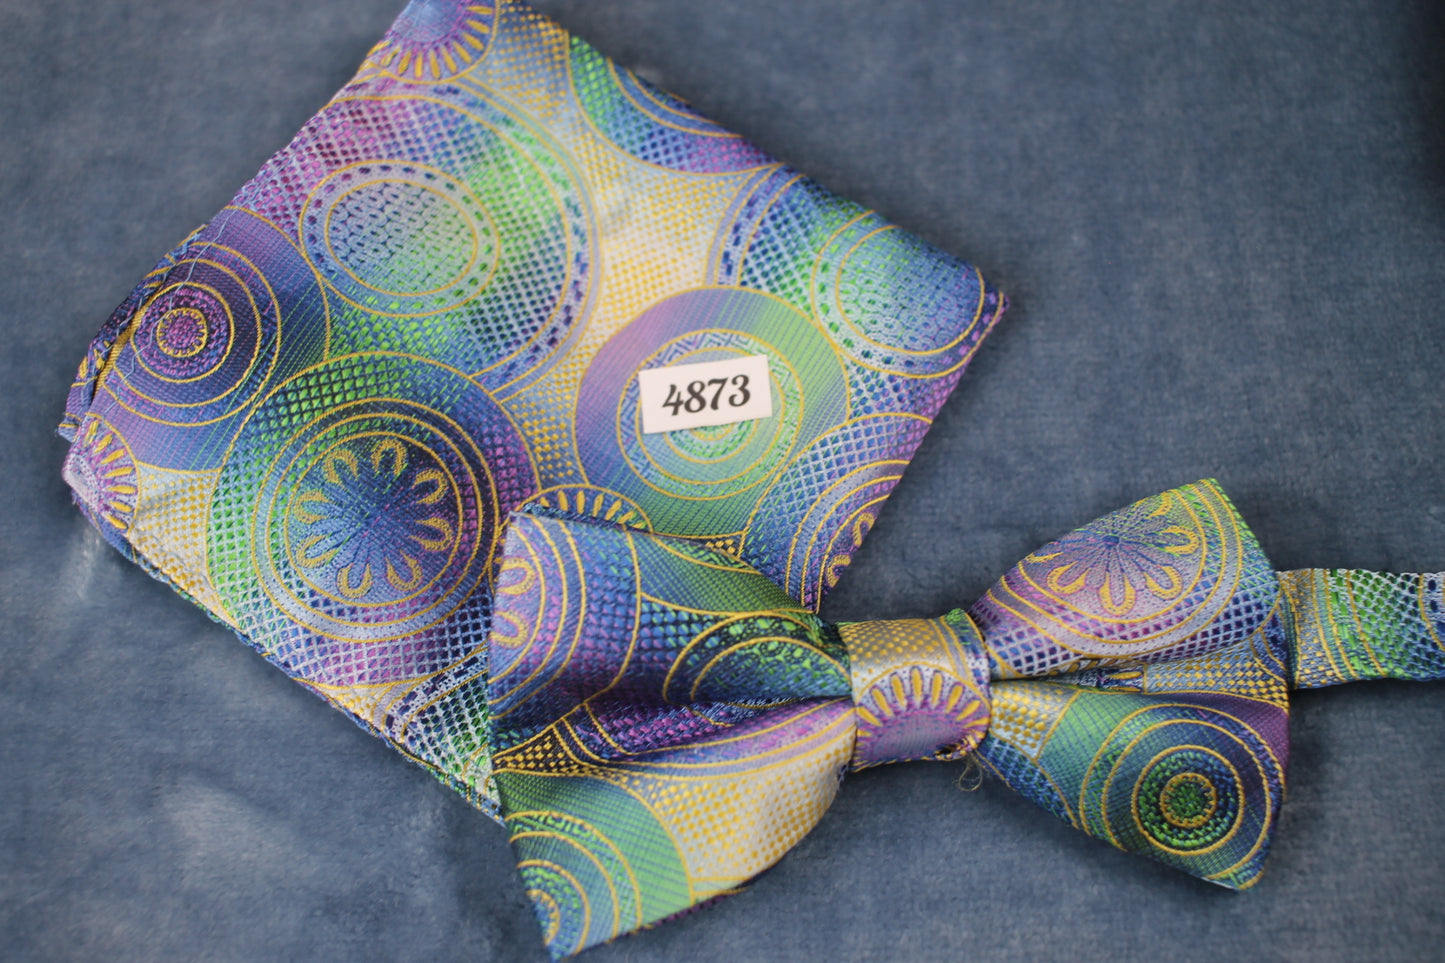 Vintage Stacy Adams pre-tied bow tie and Handkerchief Set green blue purple yellow circles pattern adjustable